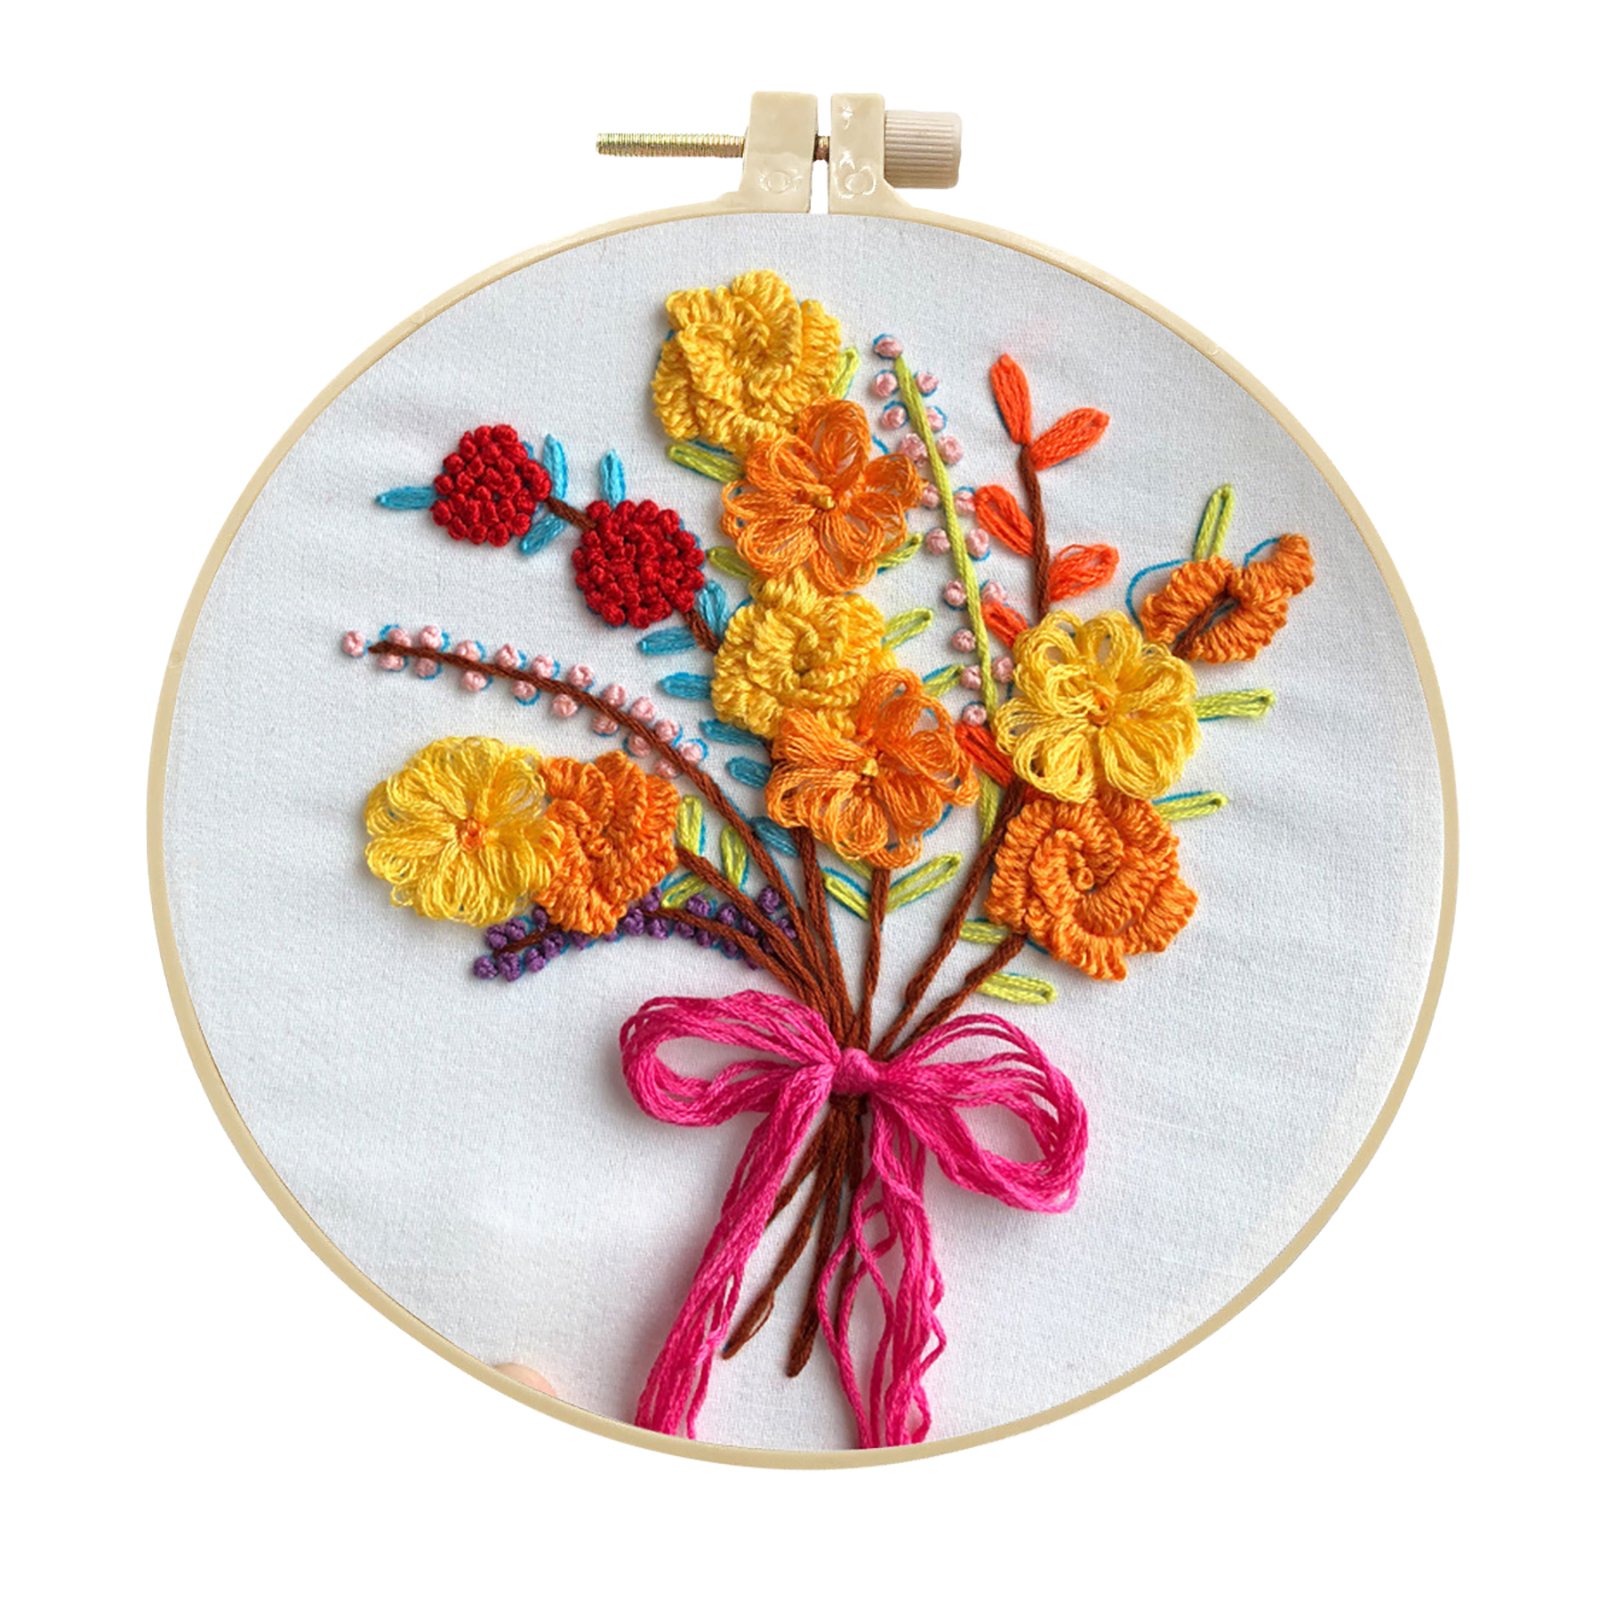 Handmade Embroidery Kit Cross stitch kit for Adult Beginner - Wildflowers Pattern